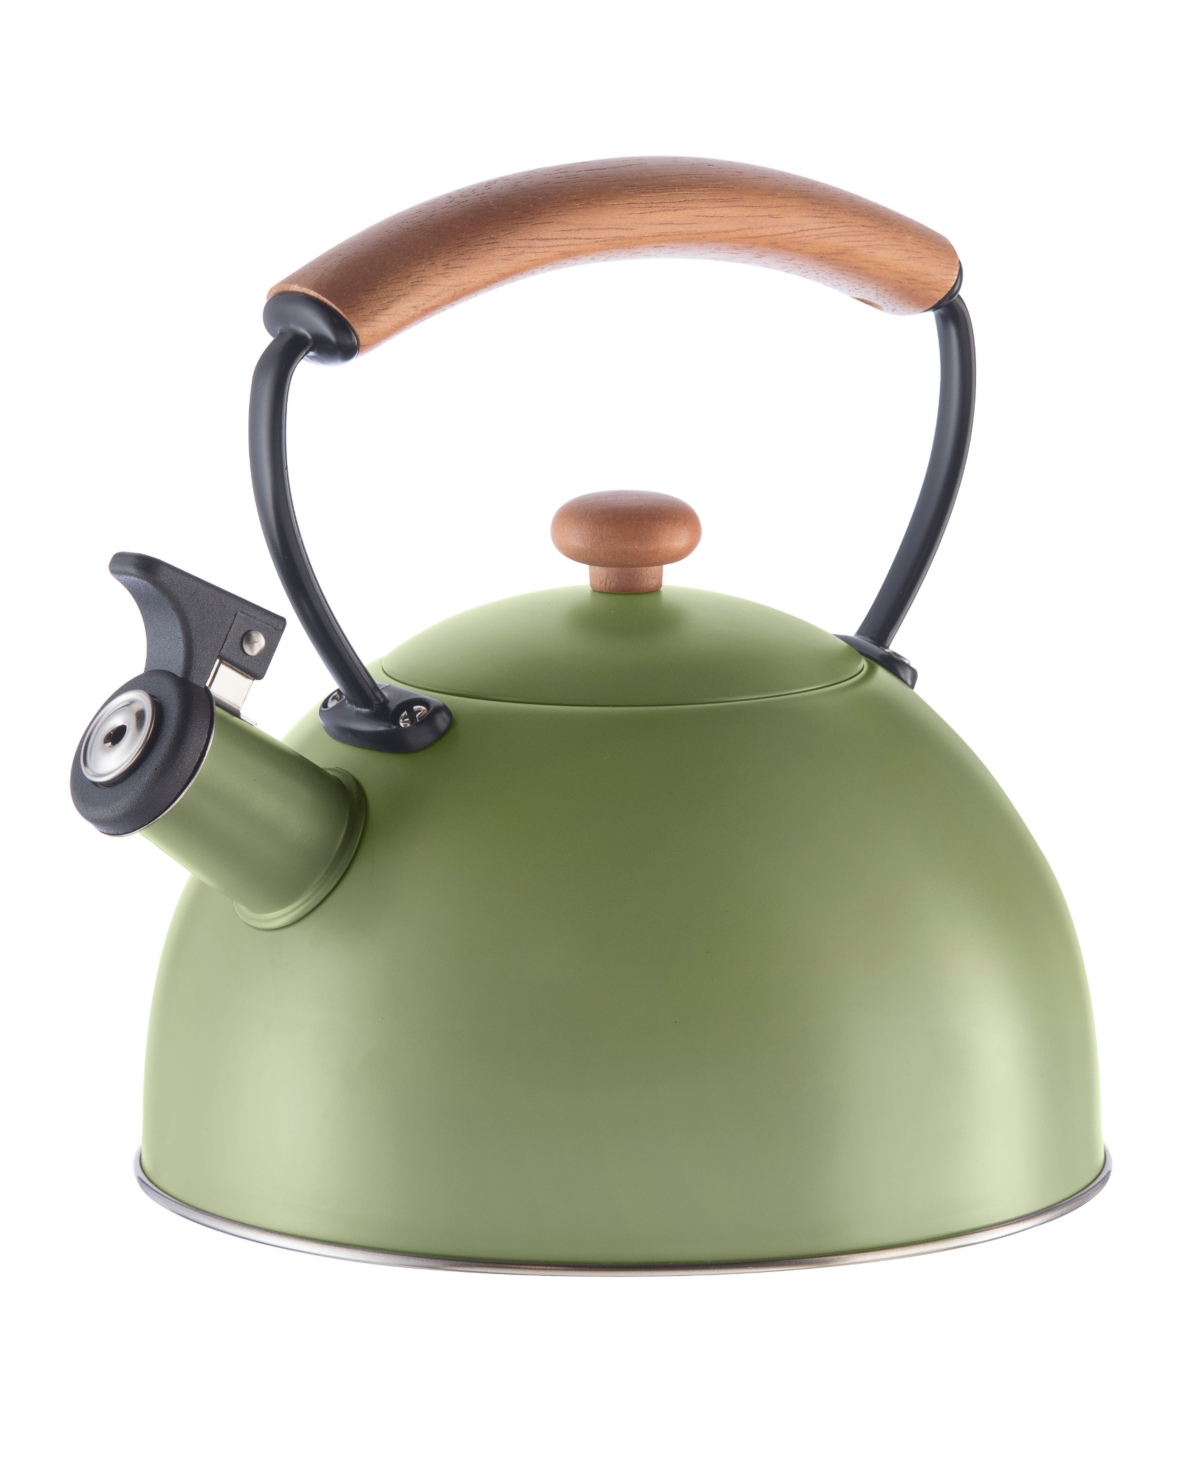 Oggi 2.5 Litre Whistling Tea Kettle With Wood Handle In Green